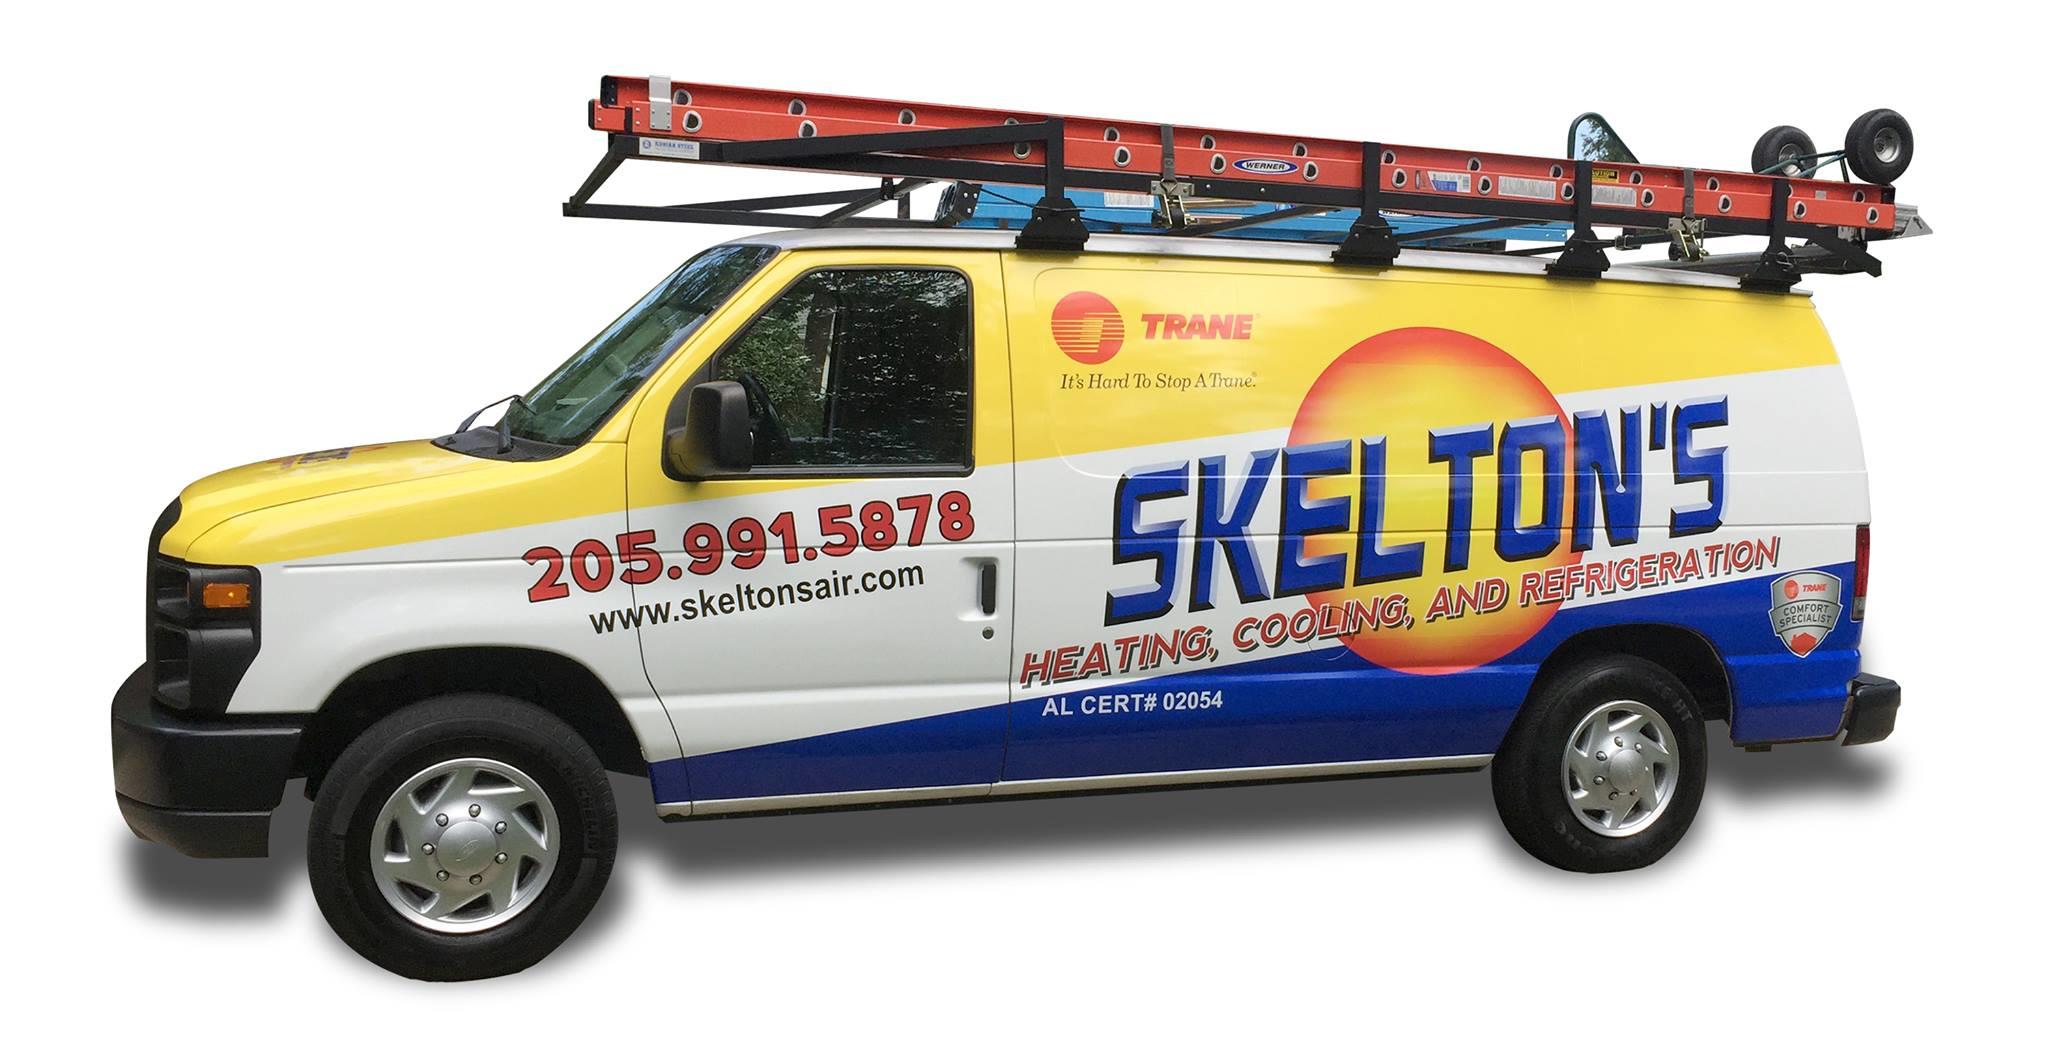 Skelton's Heating, Cooling and Refrigeration Photo